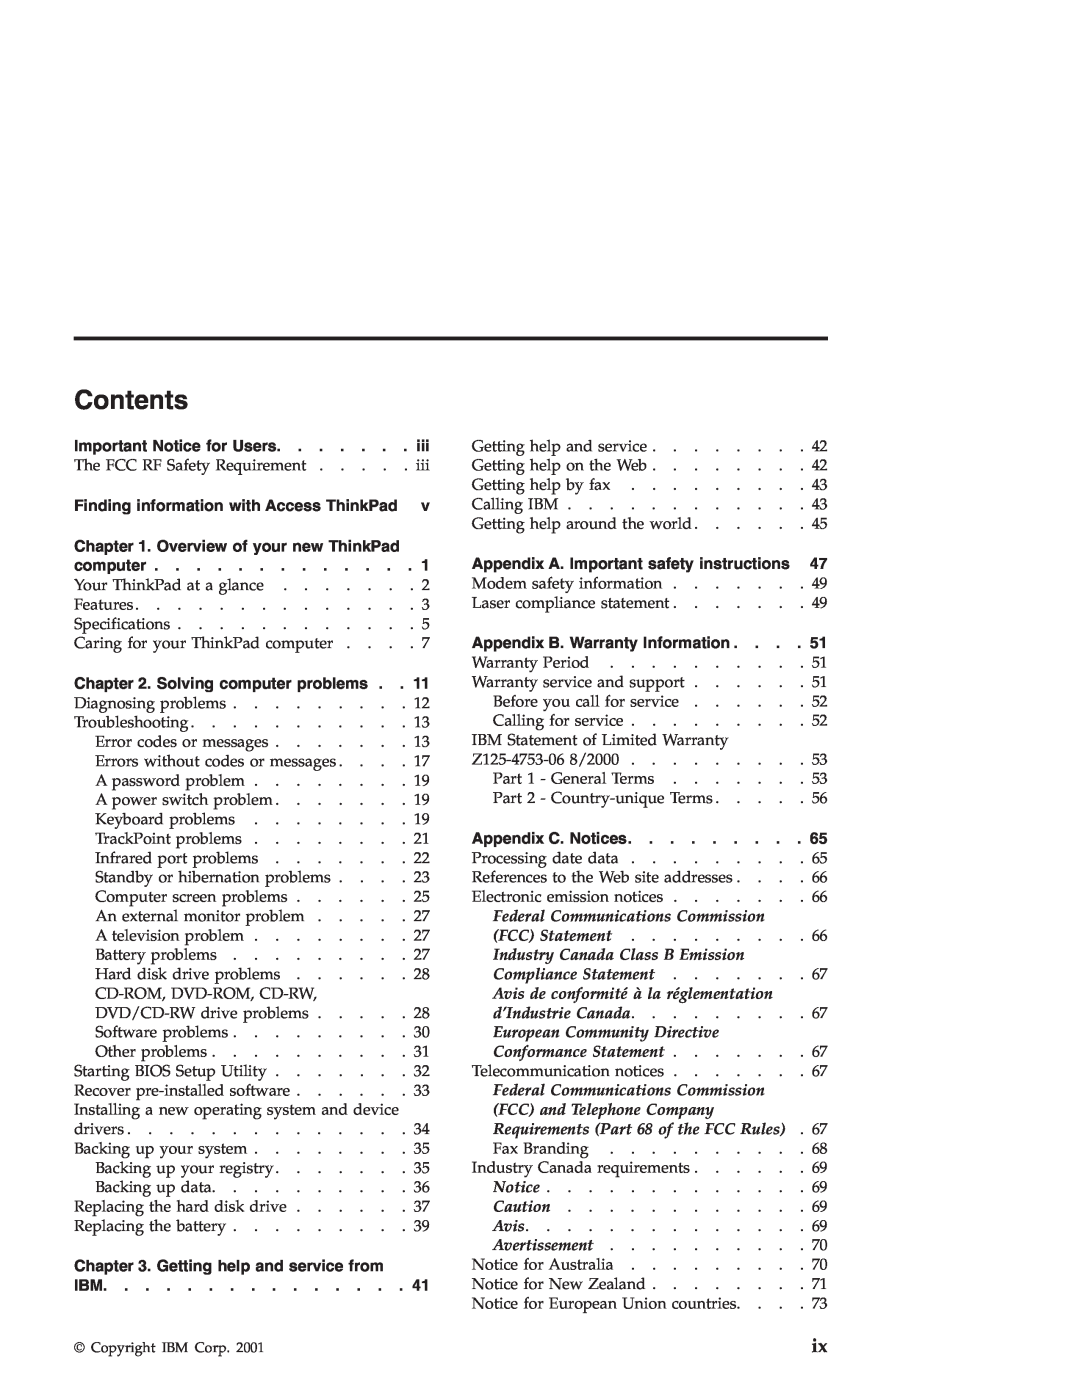 IBM R30 manual Contents, Important Notice for Users, Finding information with Access ThinkPad, Solving computer problems 